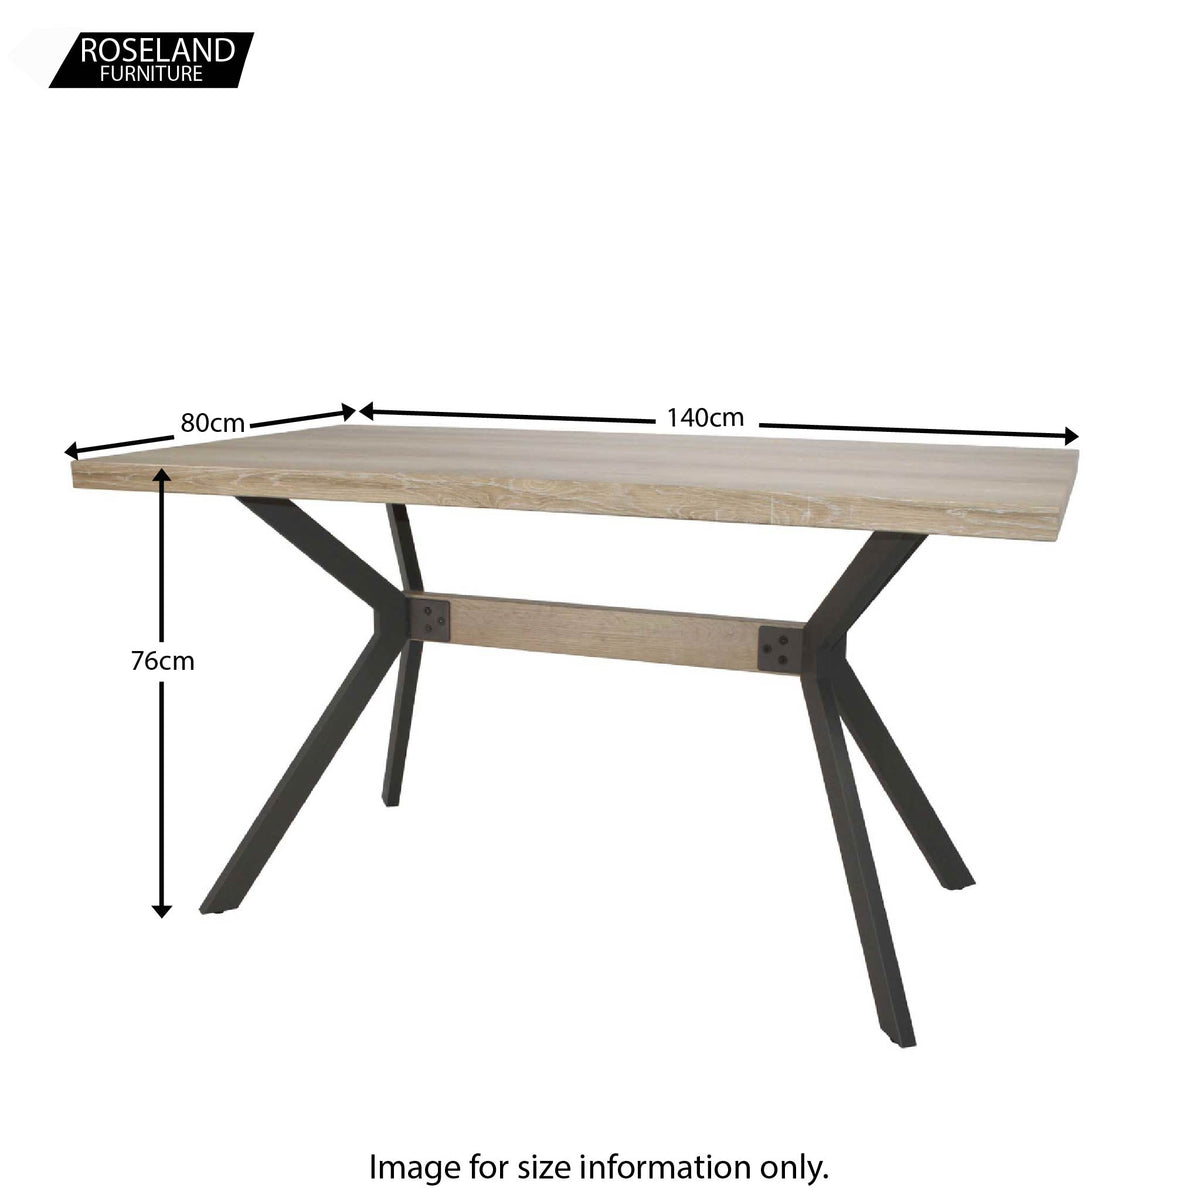 Dimensions - Redford 140cm Dining Table